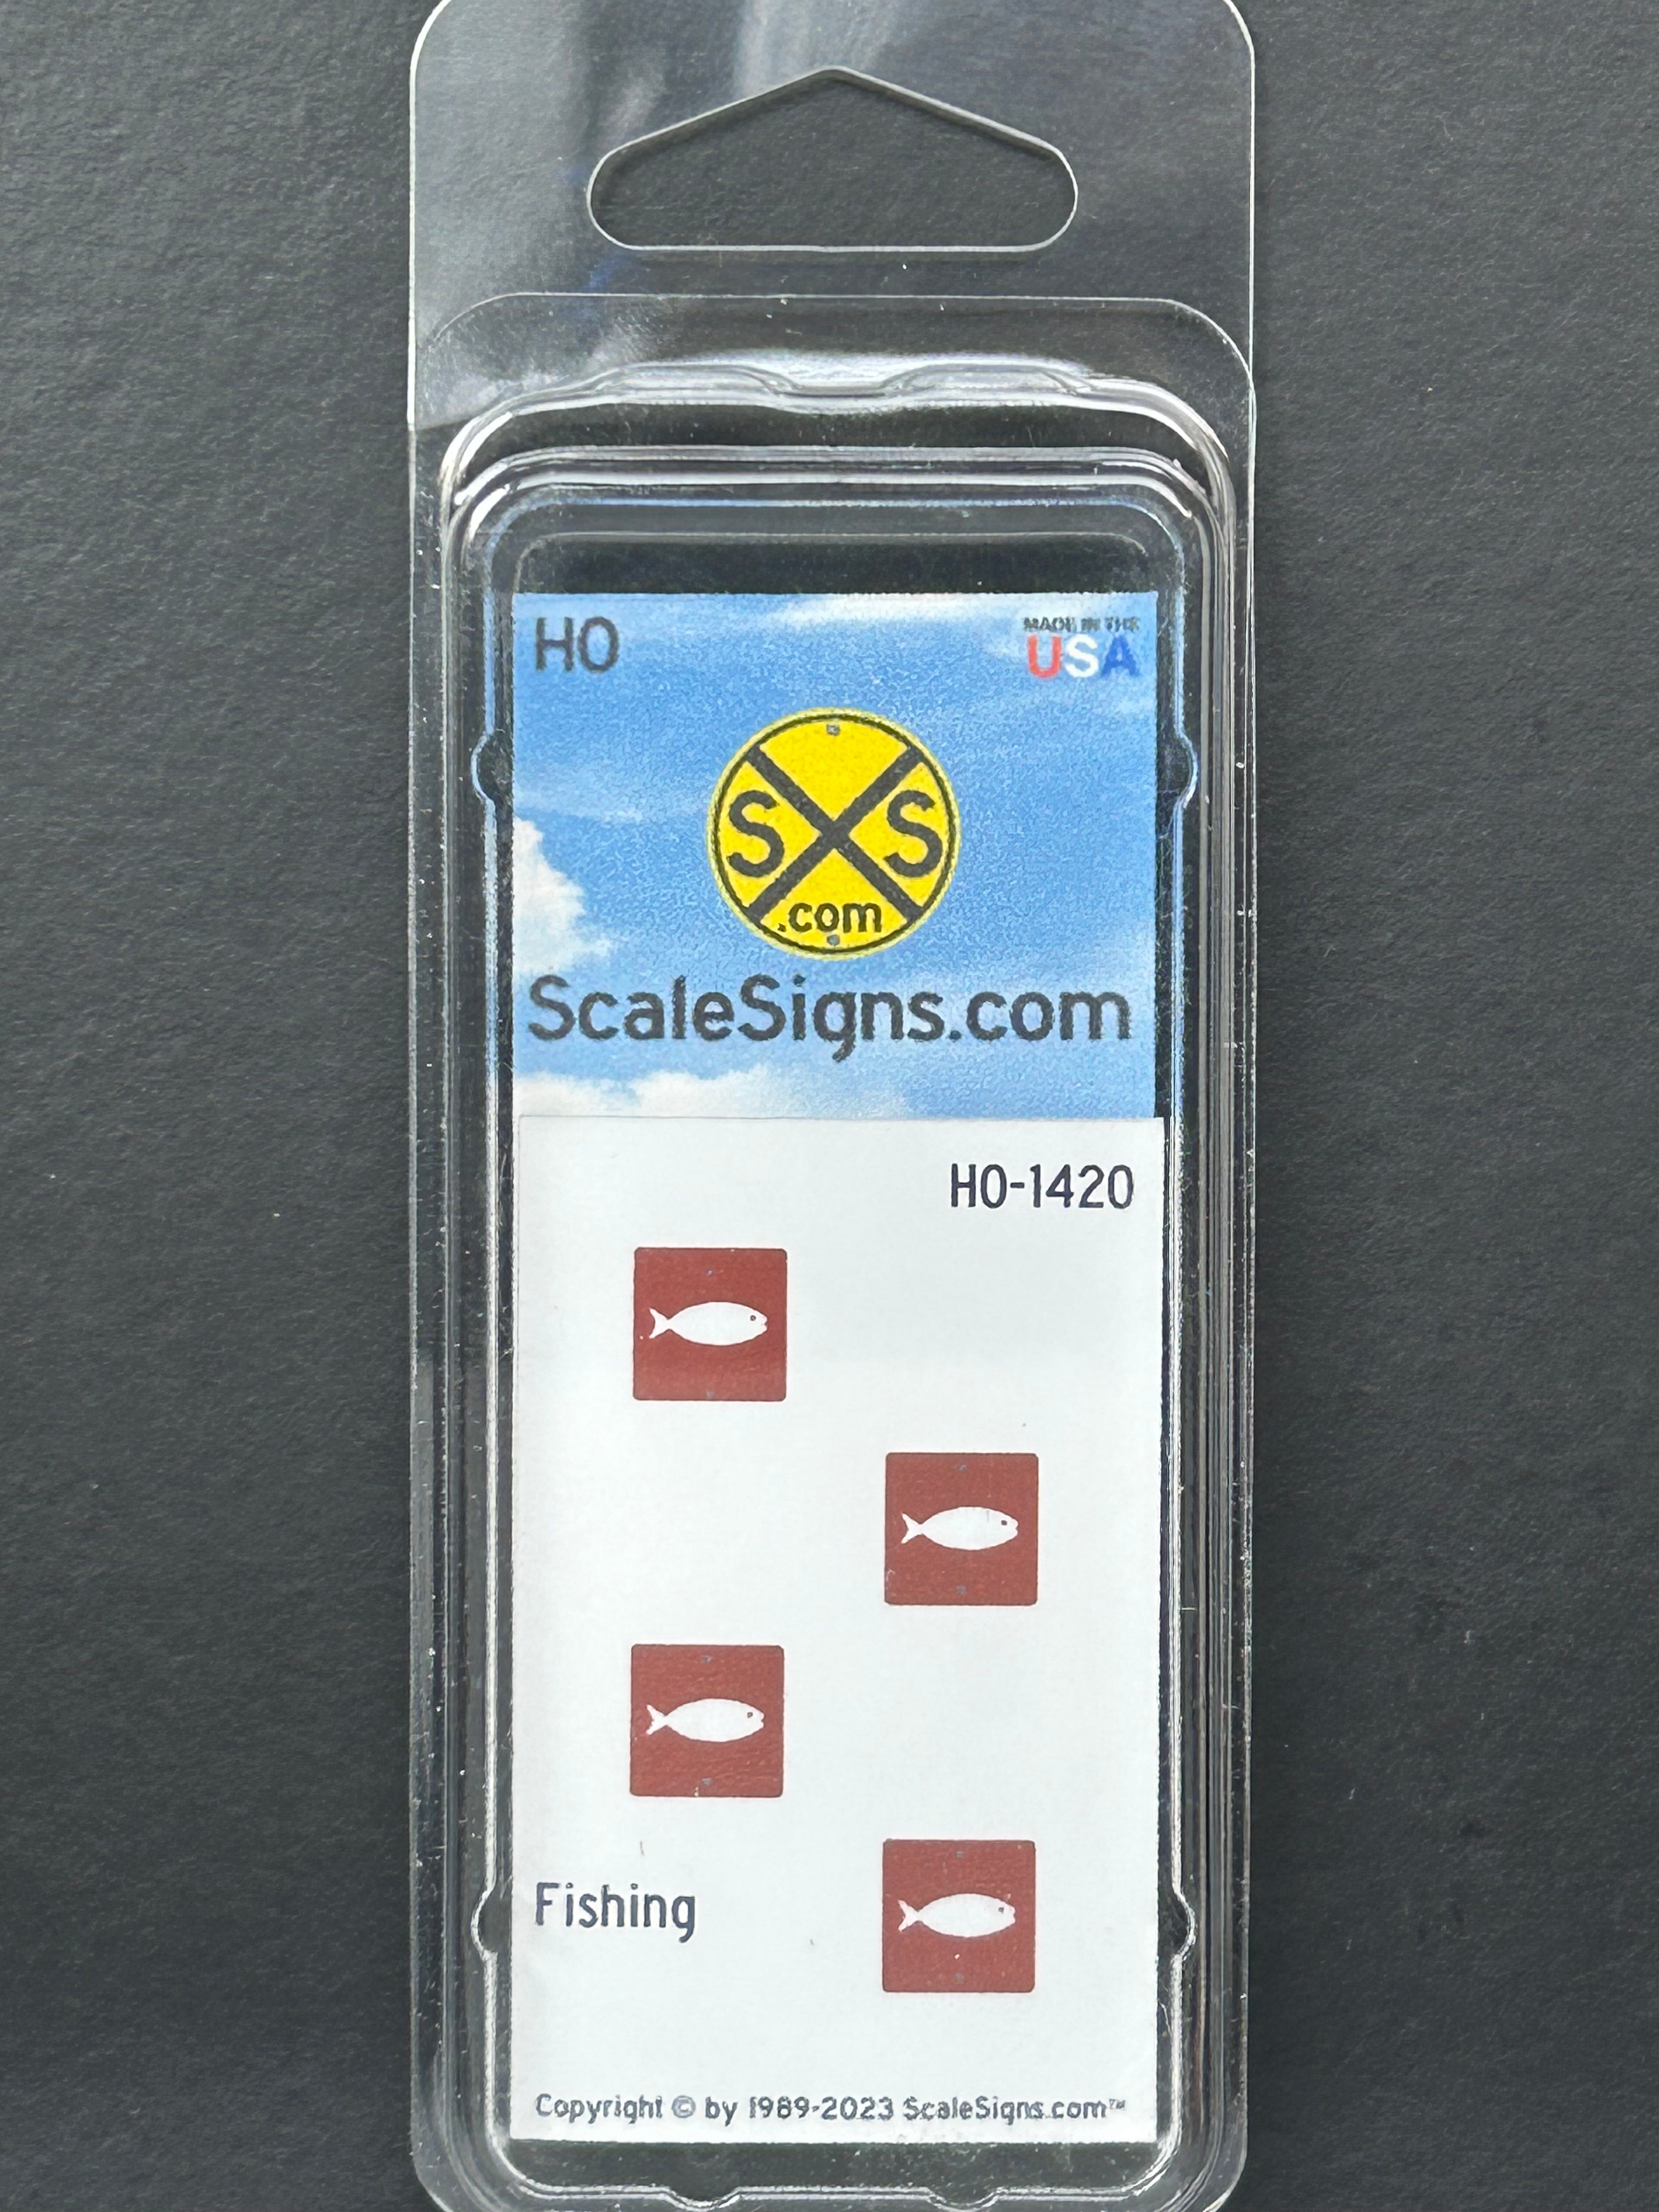 1:87 HO Scale signs.